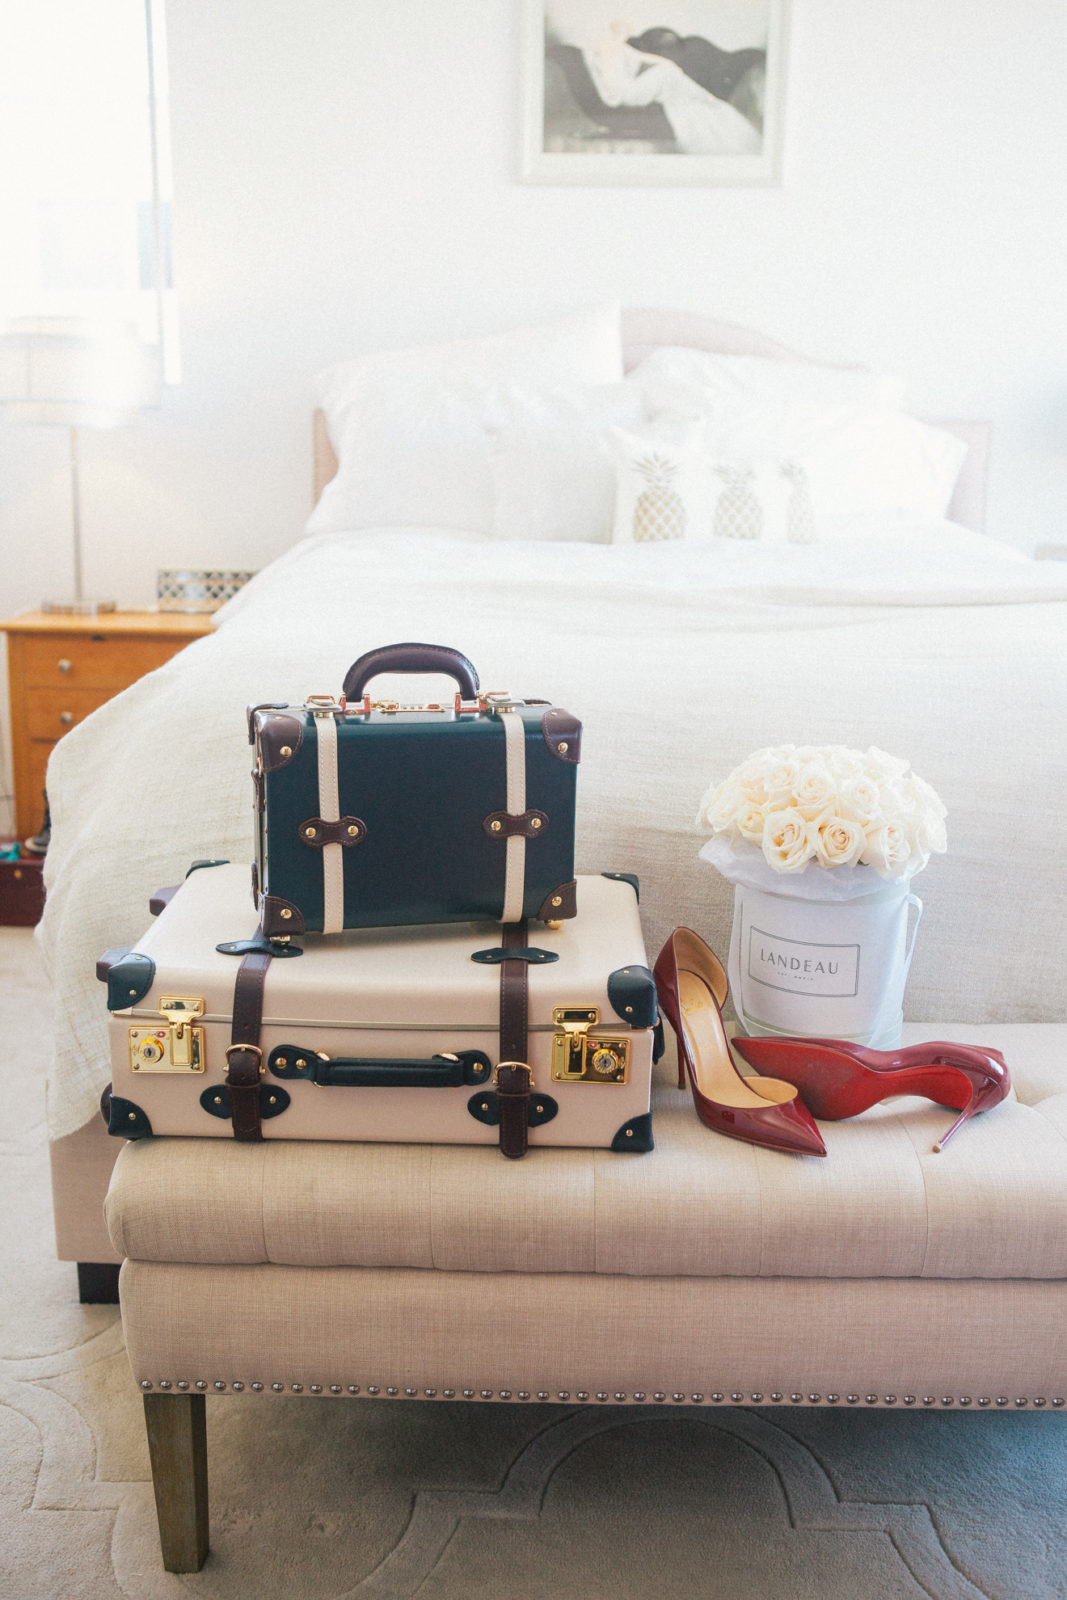 Paris packing list and Steamline Luggage by popular Los Angeles travel blogger Laura Lily